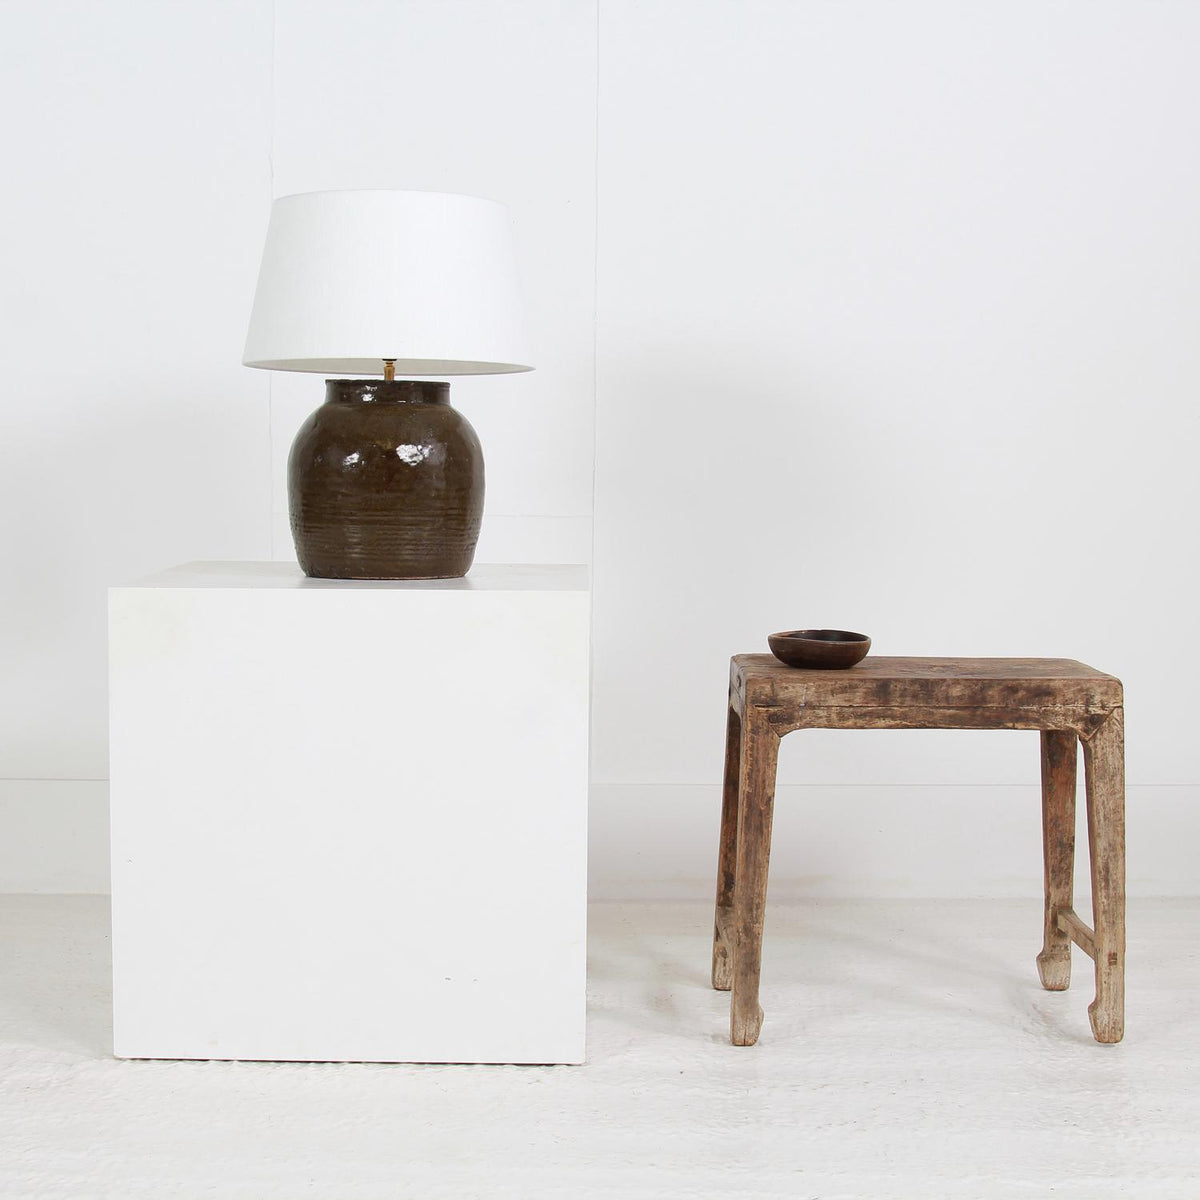 UNIQUE ANTIQUE BROWN GLAZED CERAMIC TABLE LAMP WITH White  LINEN SHADE